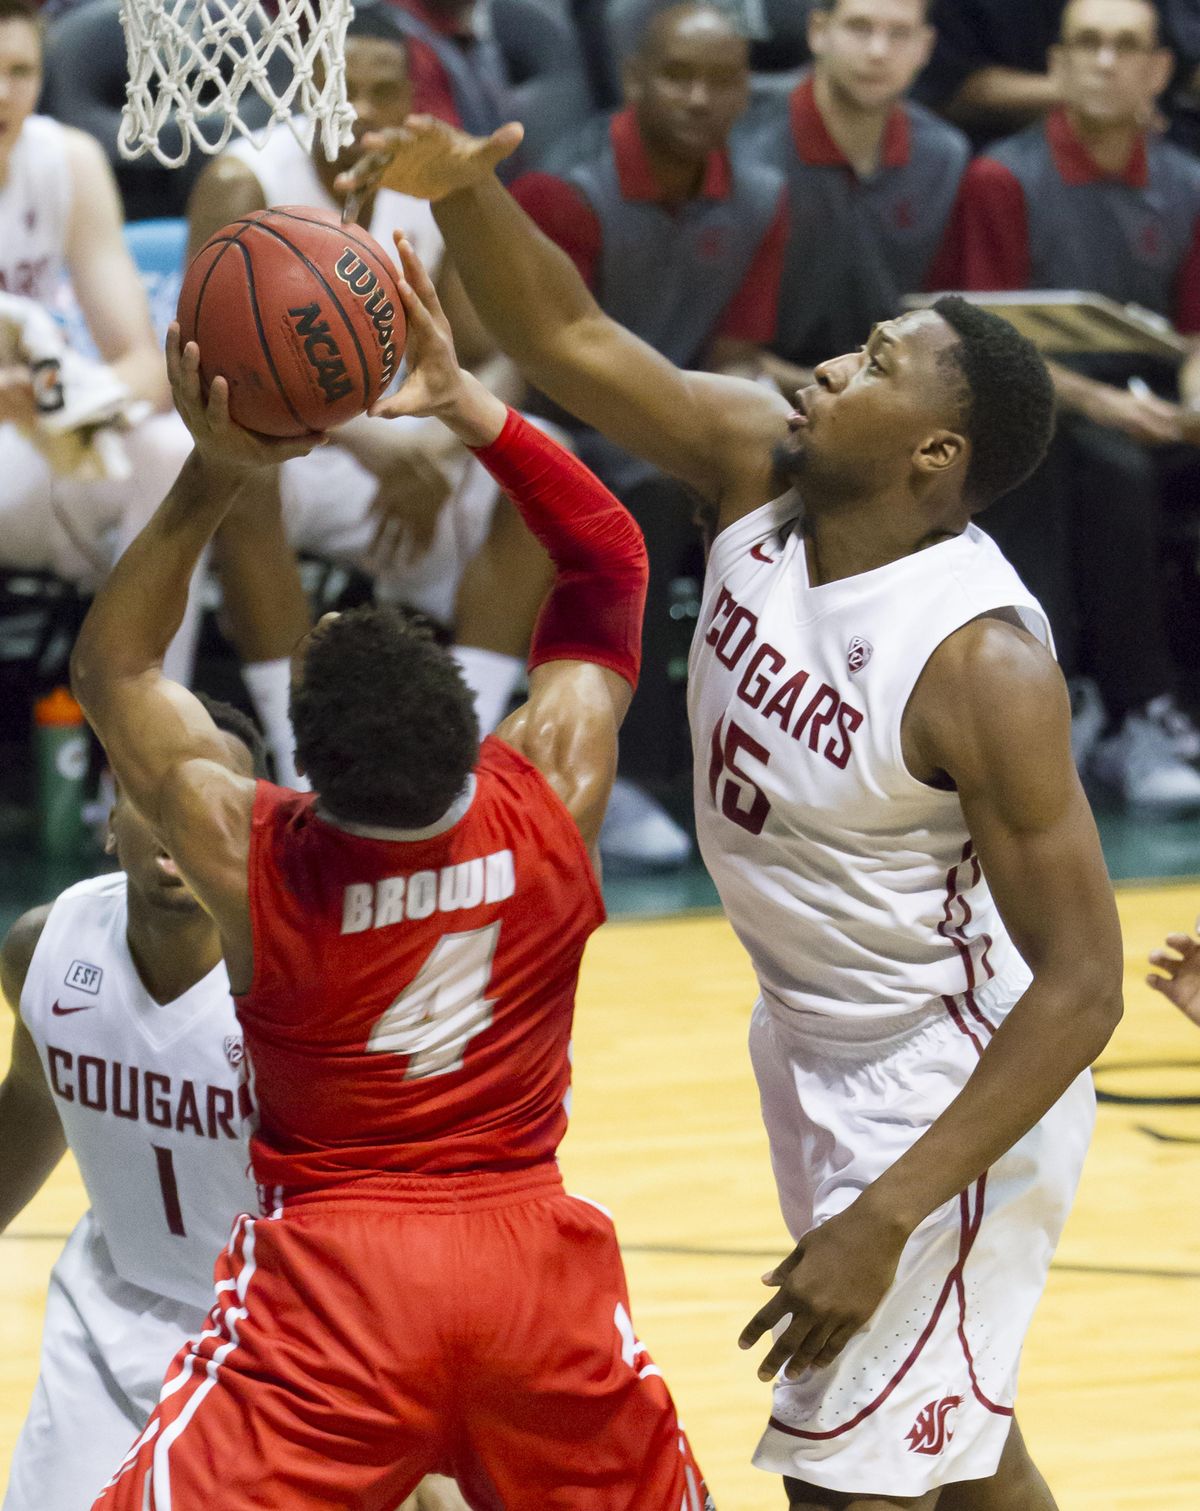 Washington State forward Junior Longrus, right, blocks shot by New Mexico guard Elijah Brown (4) in the first half of game Friday at the Diamond Head Classic, Friday, Dec. 25, 2015, in Honolulu.